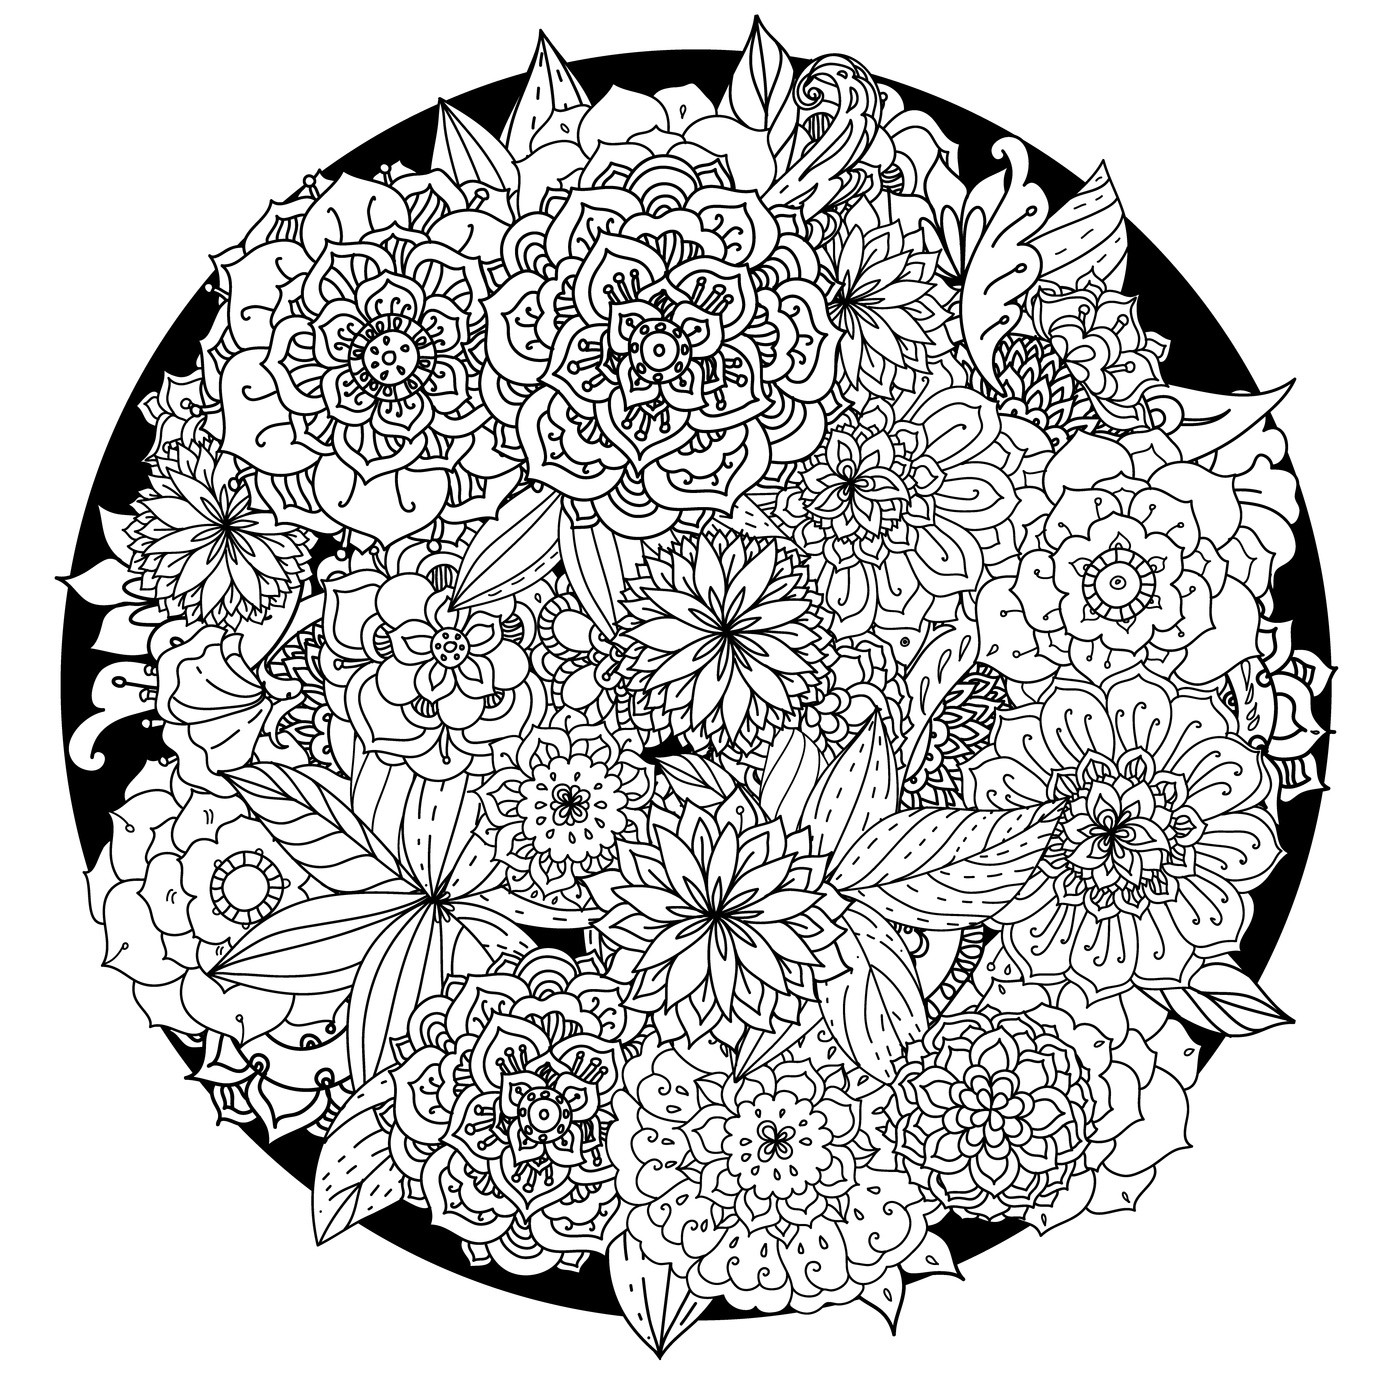 Coloring Pages For Girls Flower Mandala
 Flower Mandala Coloring Pages coloringsuite